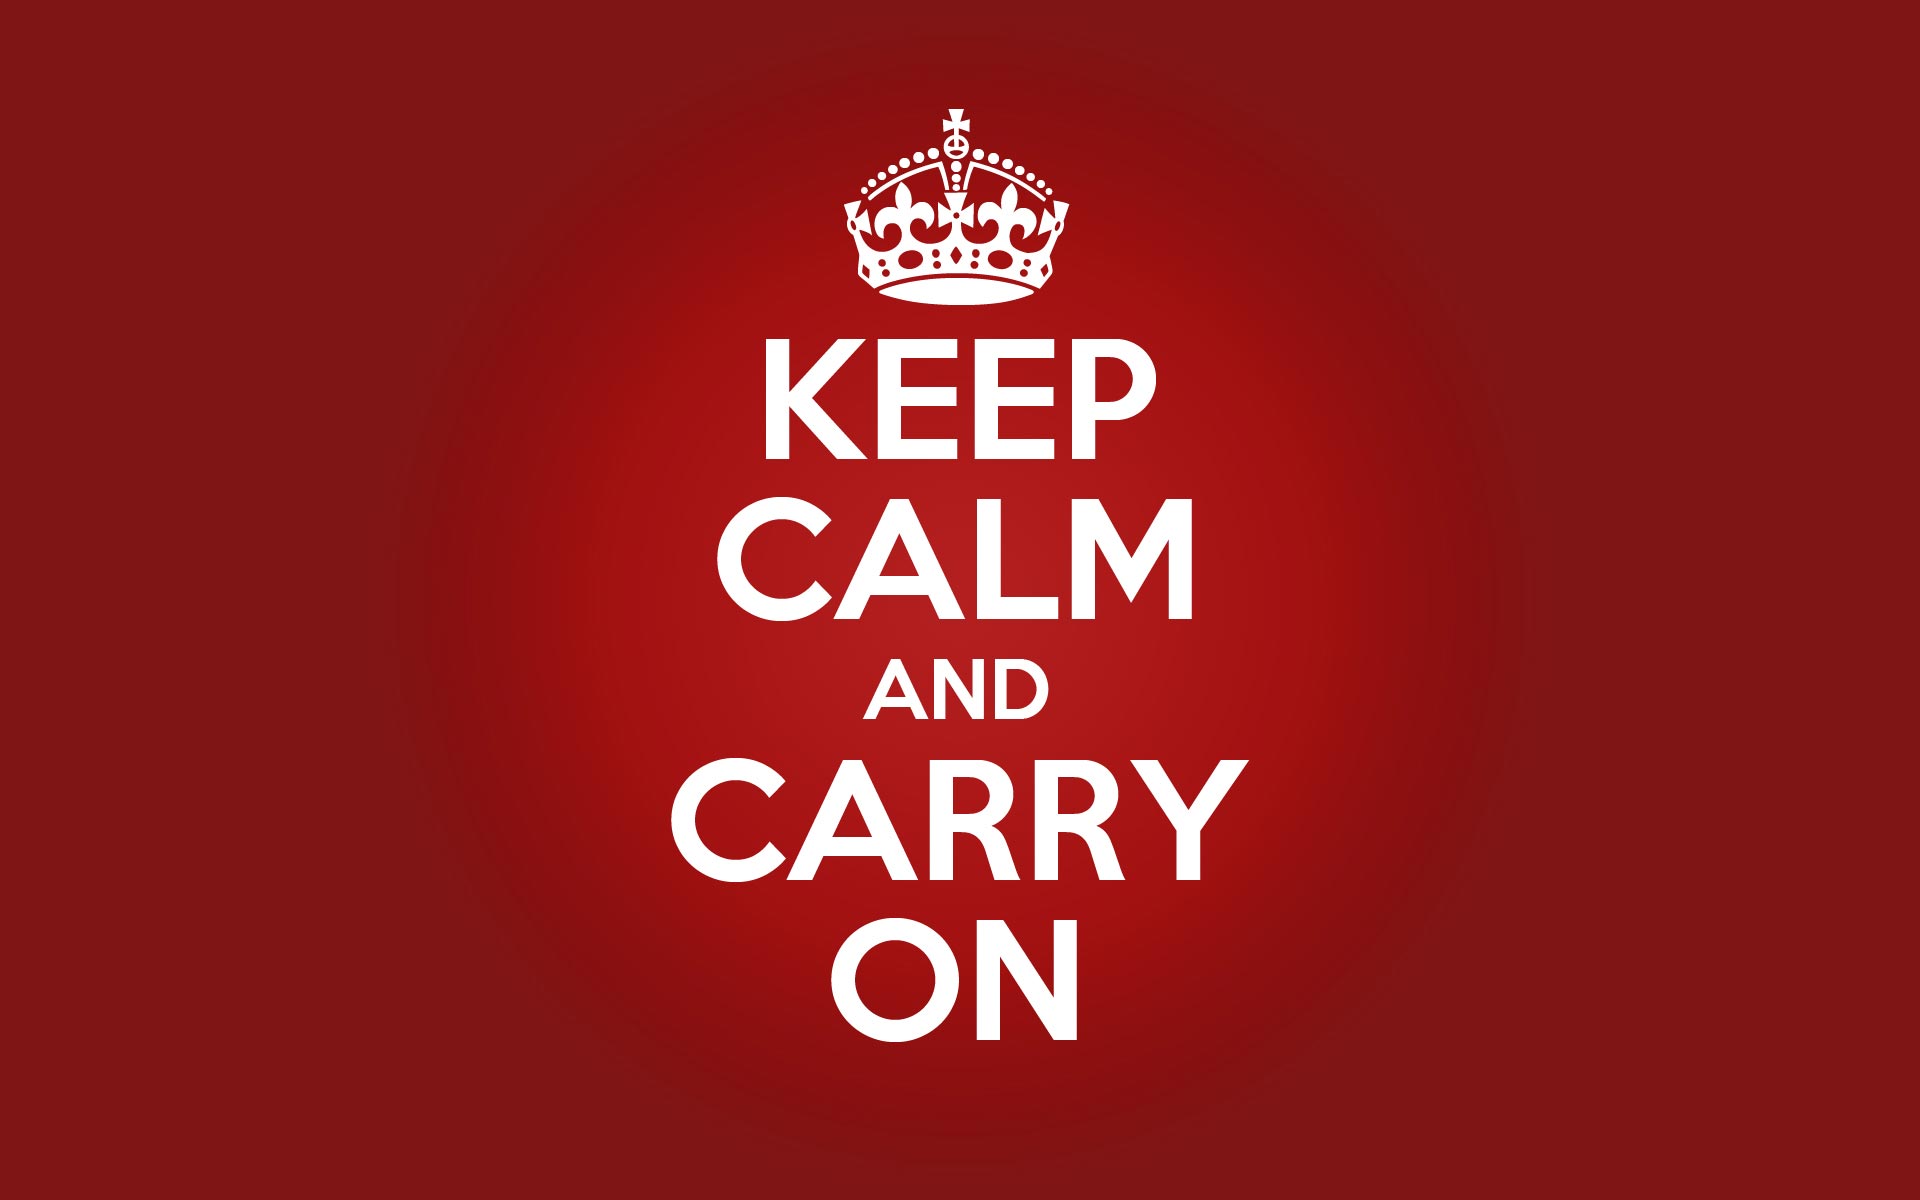 keep_calm_and_carry_on_hd_widescreen_wallpapers_1920x1200.jpg